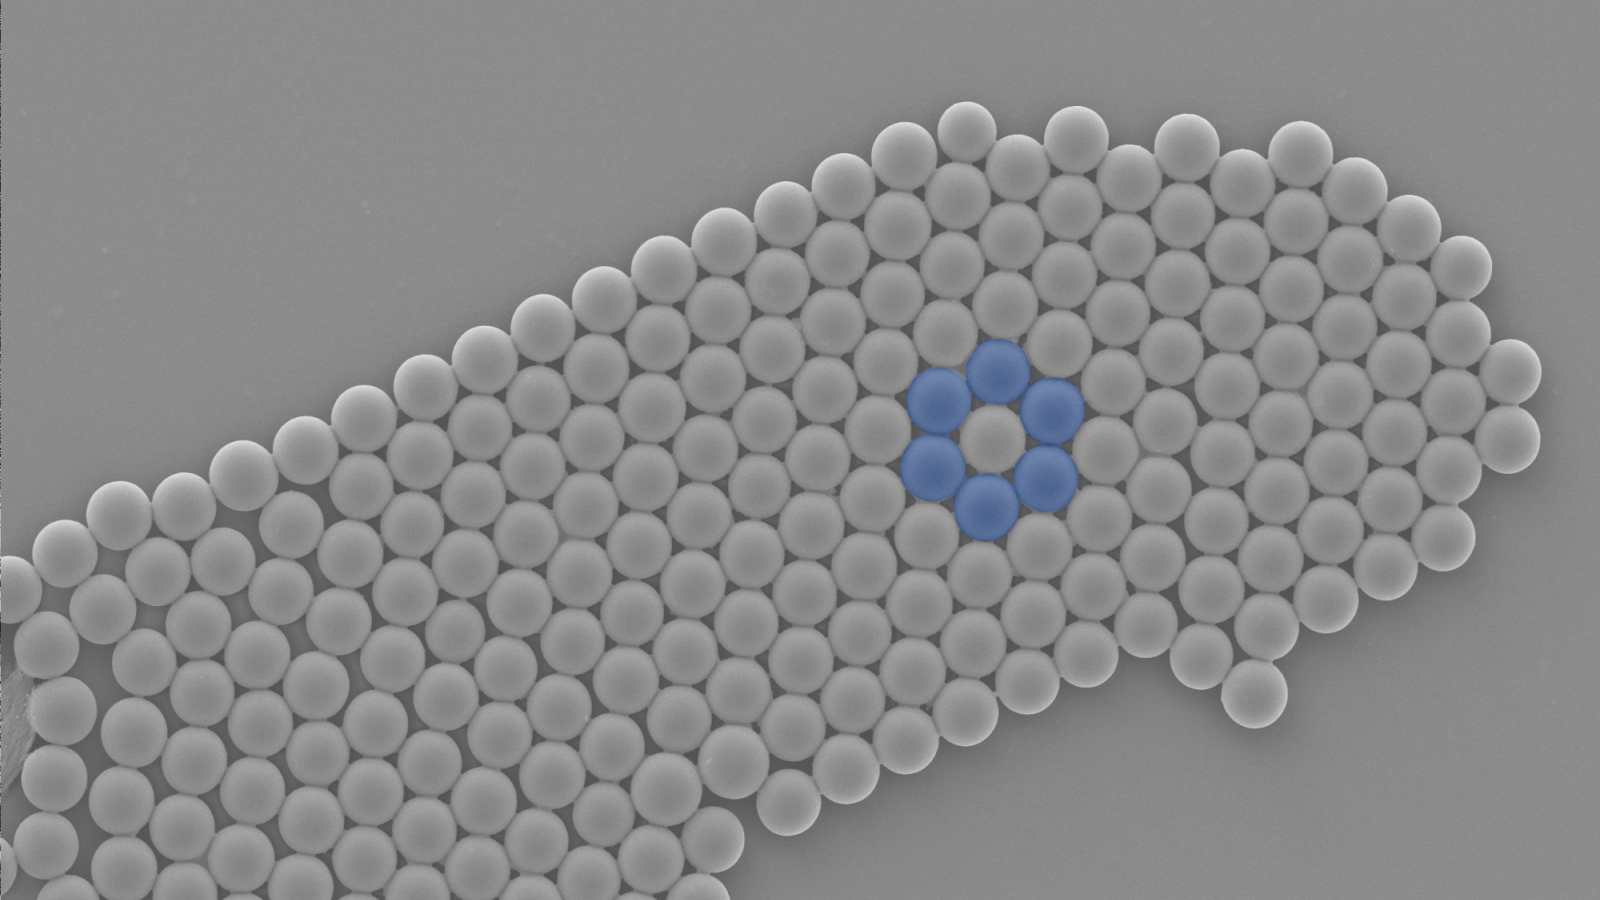 Nanoscale texture of circular cells grouped together, with a few blue cells forming a circle in the center